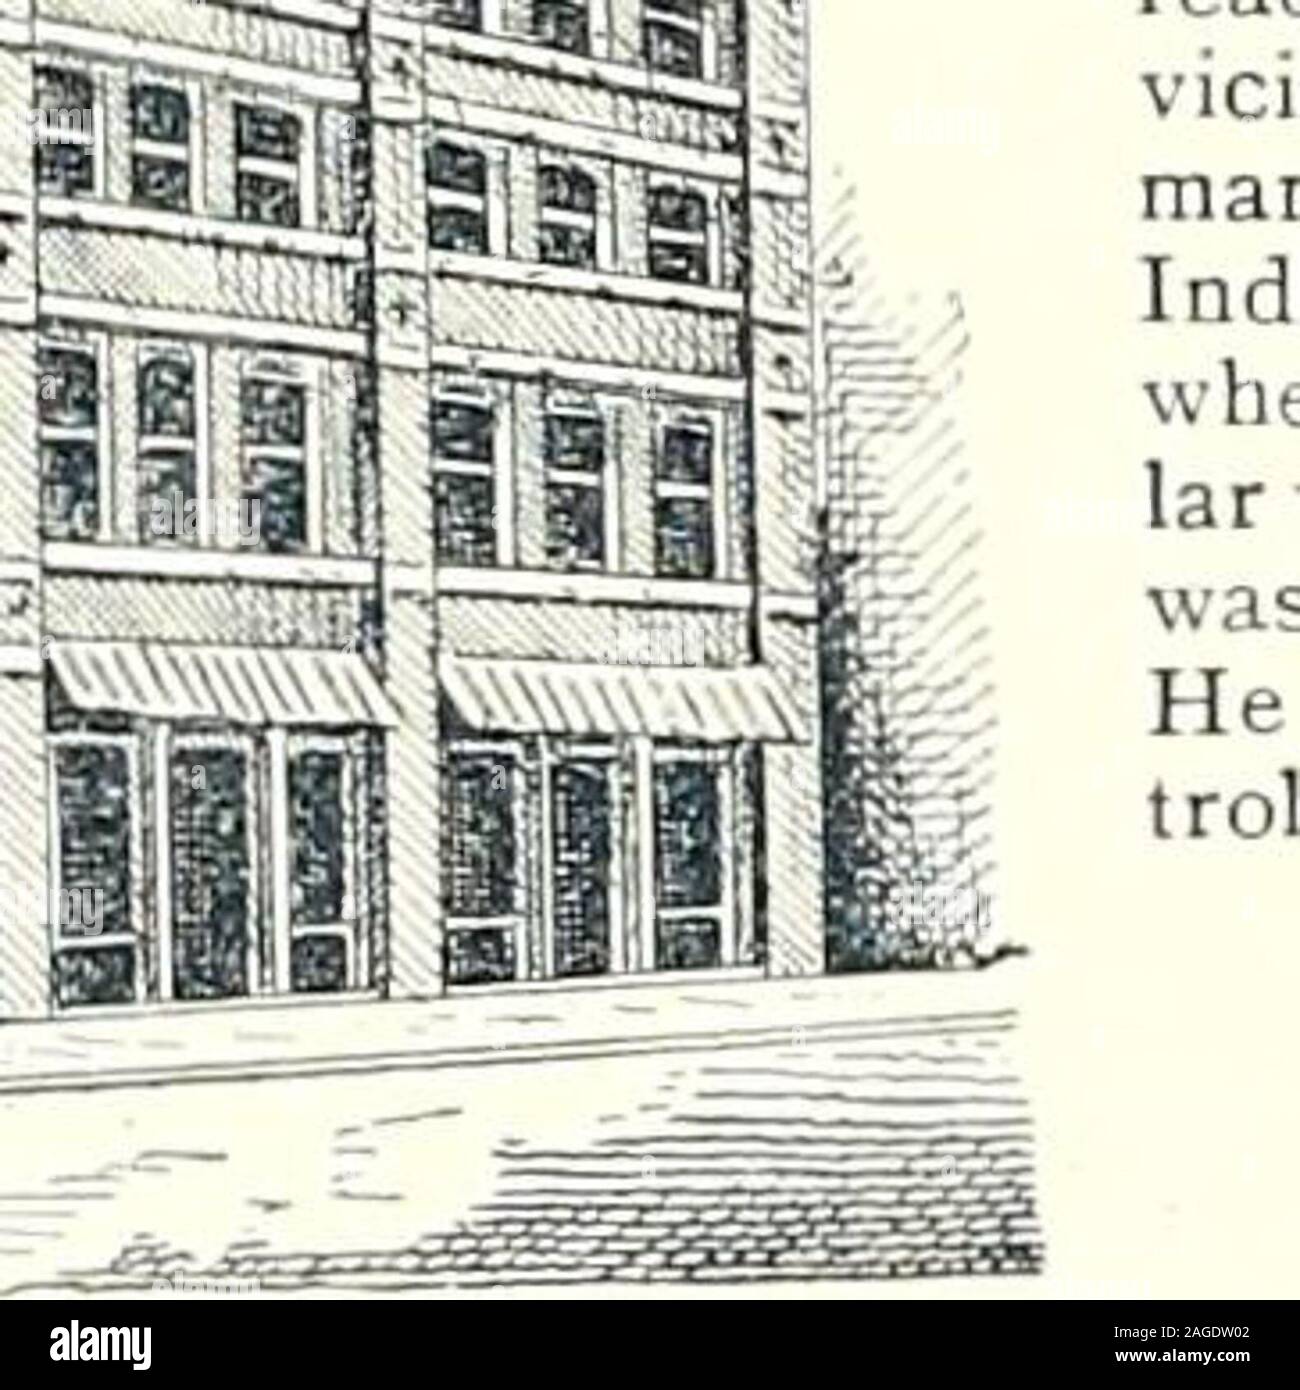 . Indianapolis illustrated : the capital city of Indiana : its growth, resources, commerce, manufacturing interests, financial institutions, and prospects, also sketches of the leading business concerns which contribute to the city's progress and prosperity : a complete history of the city from foundation to the present time. enced busoperations in 1883 at 3.&gt; EastPearl street, and in July erectedthe fine substantial three-storybuilding, now occupied at thecorner Davidson and Washingtonstreets. The building is 40x60 feet ; equip- *.f 524*^ tUi.Uc-i^iK. fflllLII 11 f II!. ped with the latest Stock Photo